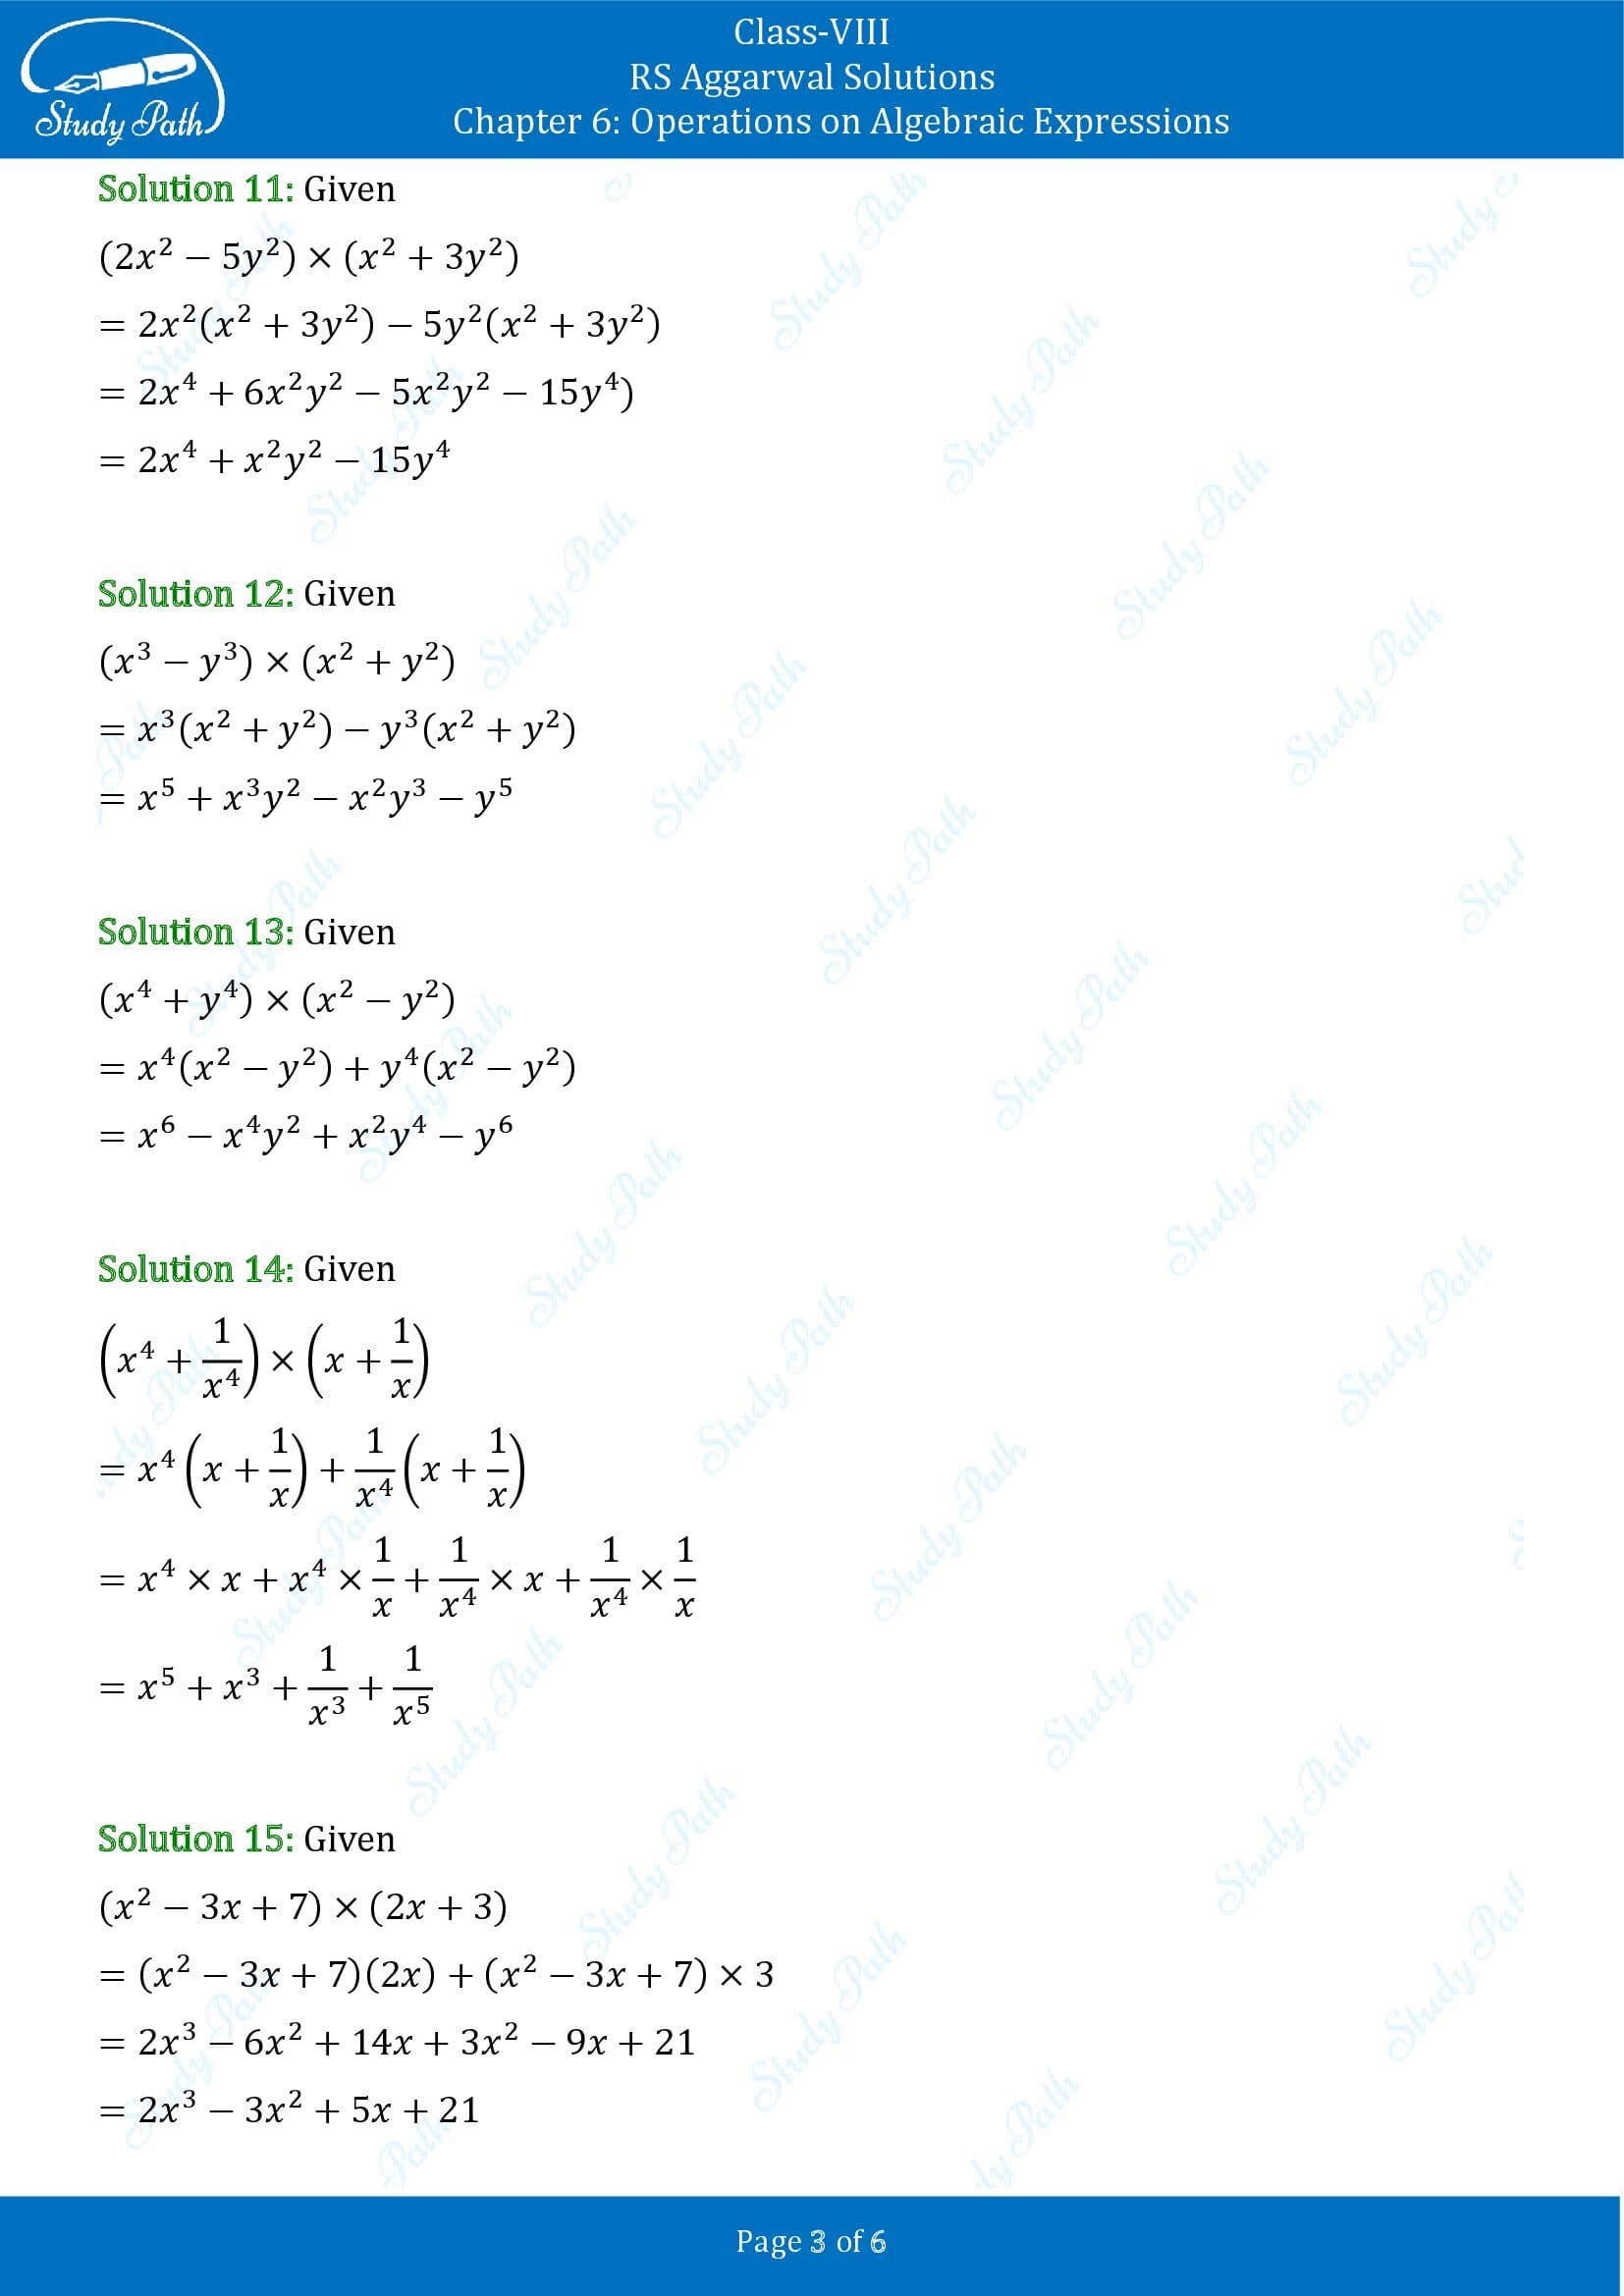 RS Aggarwal Solutions Class 8 Chapter 6 Operations on Algebraic Expressions Exercise 6B 00003